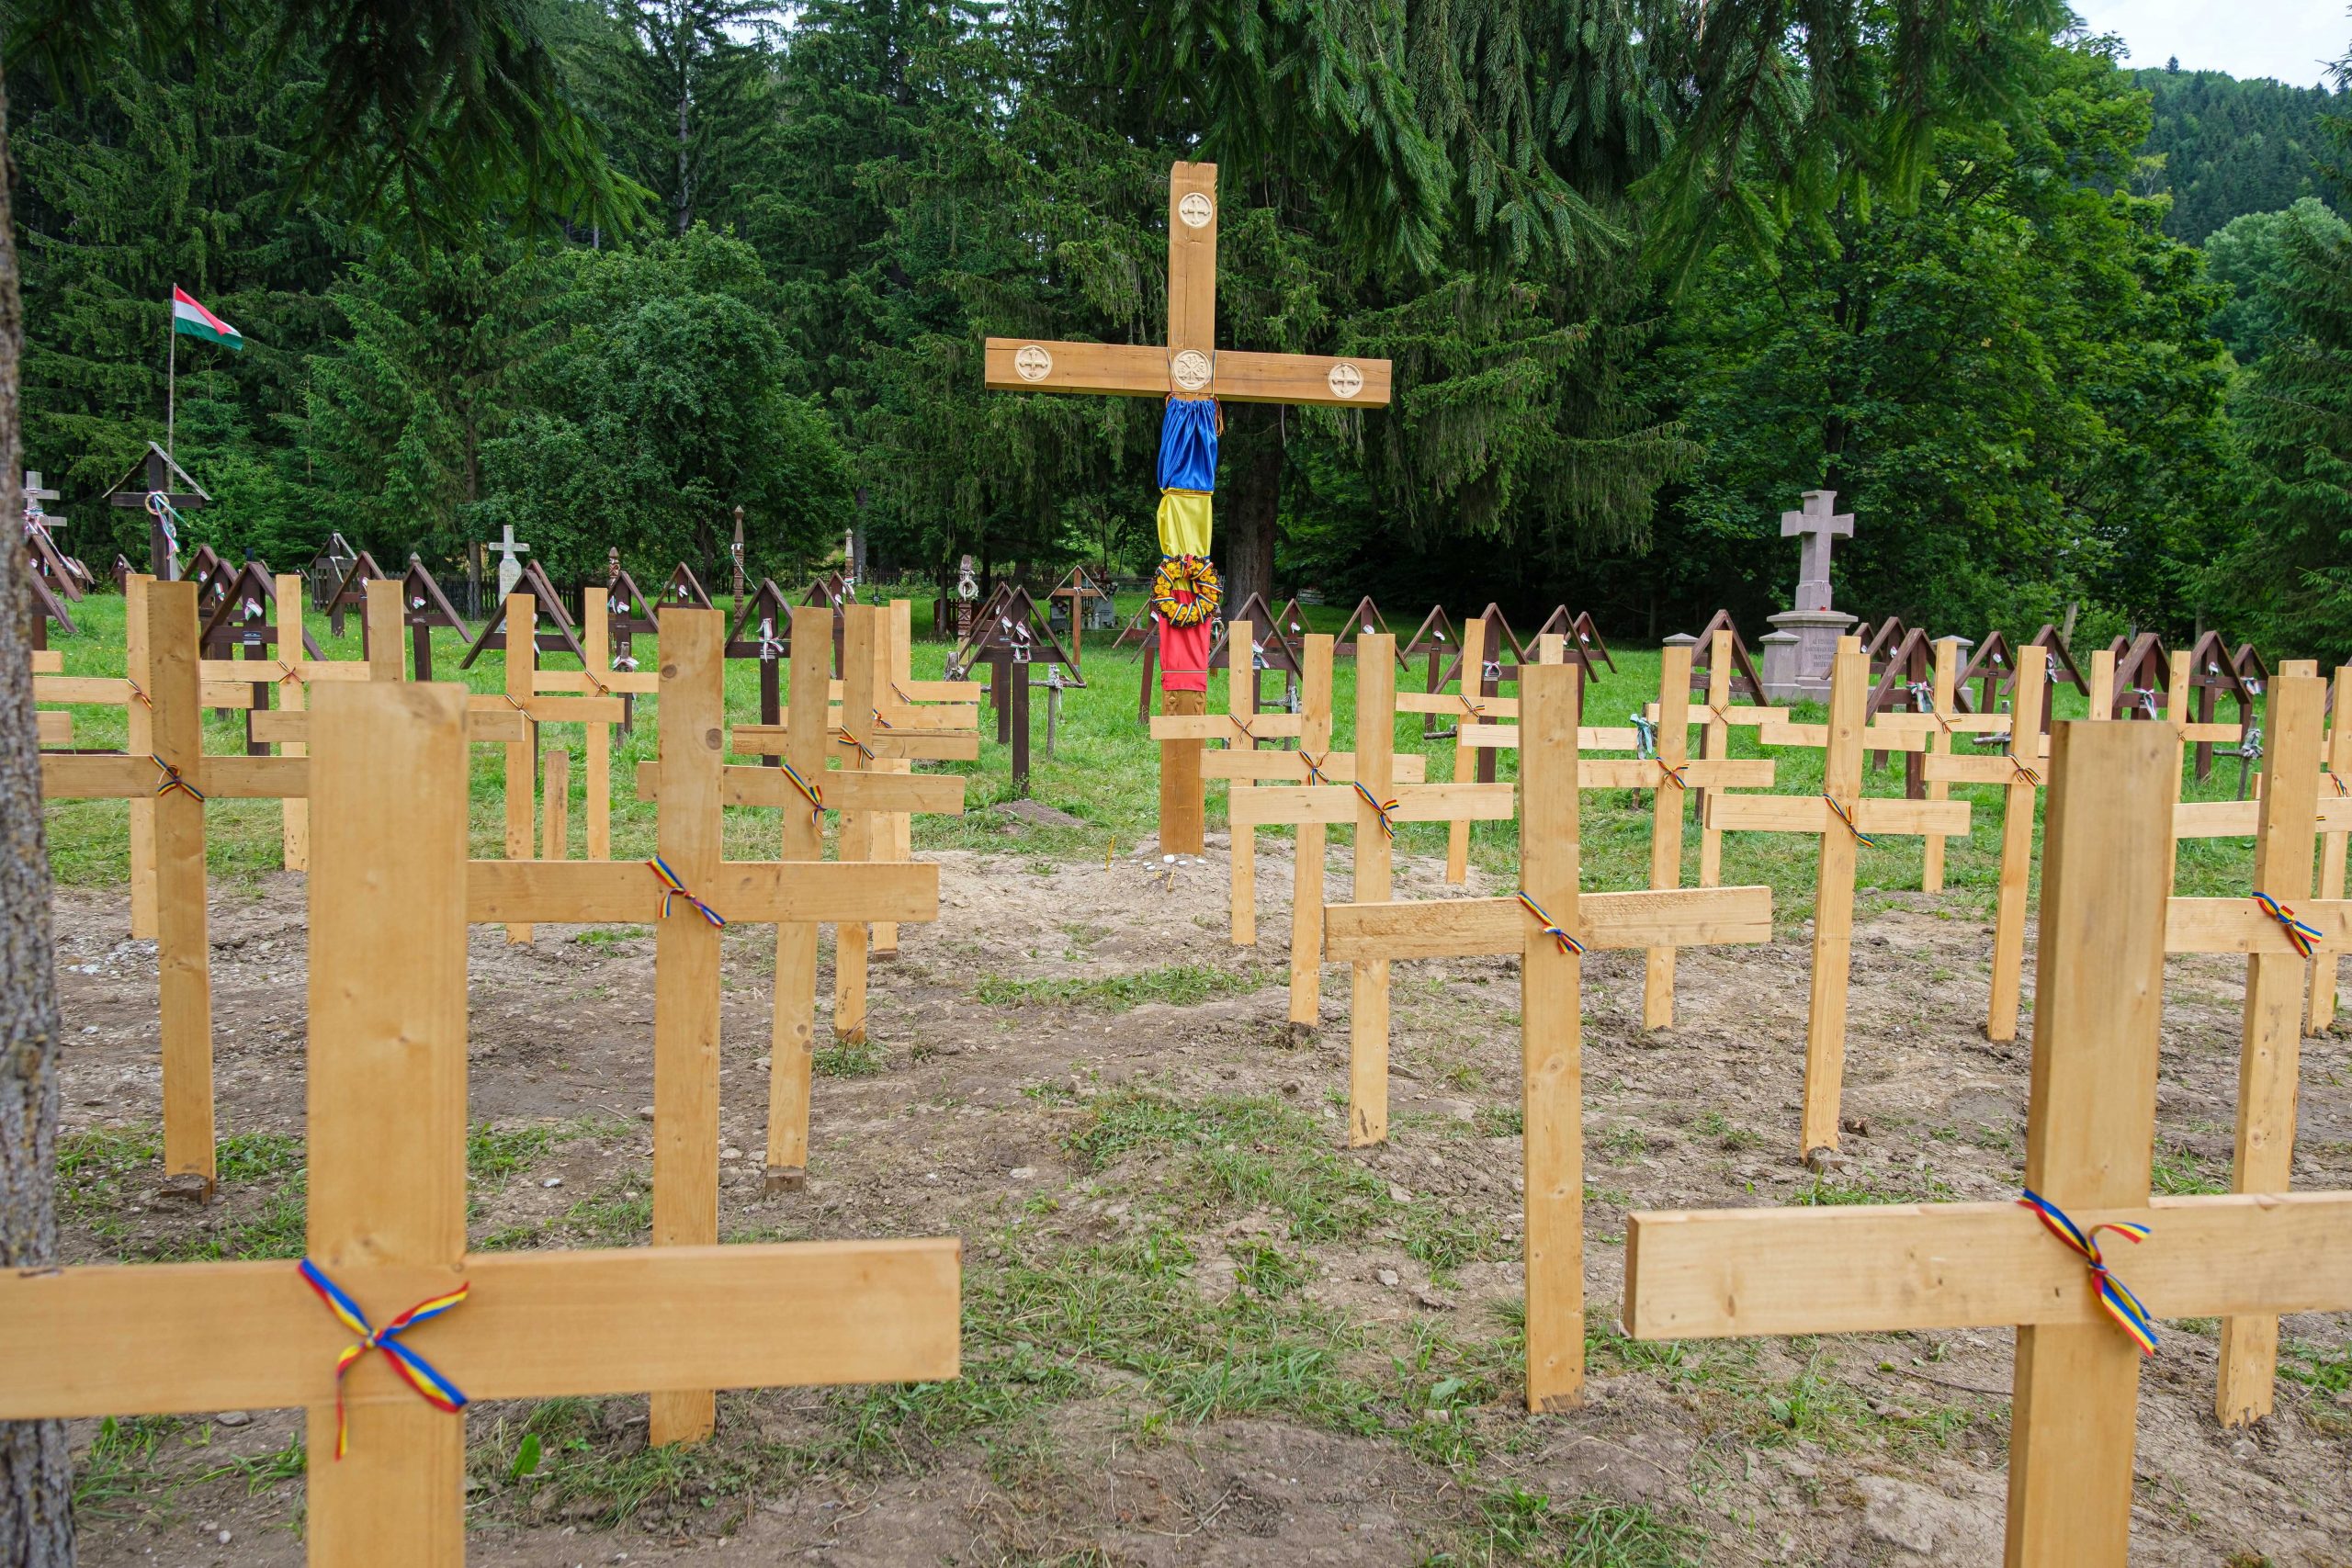 Romanian Gendarmerie Passes the Buck on Fining for Desecration of Military Cemetery